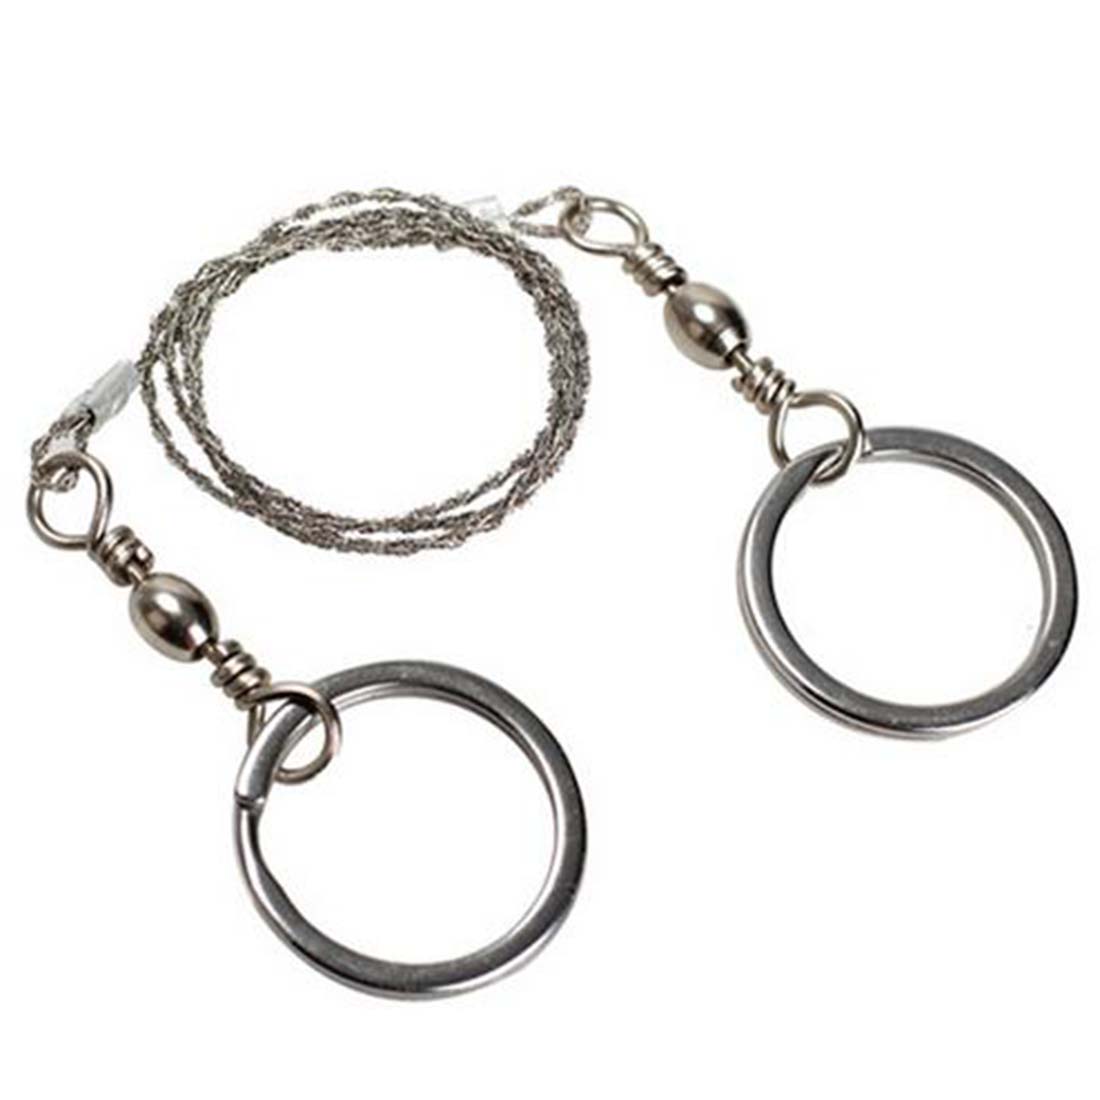 1Pc Stainless steel wire saw outdoor camping emergency survival gear tools  W0 